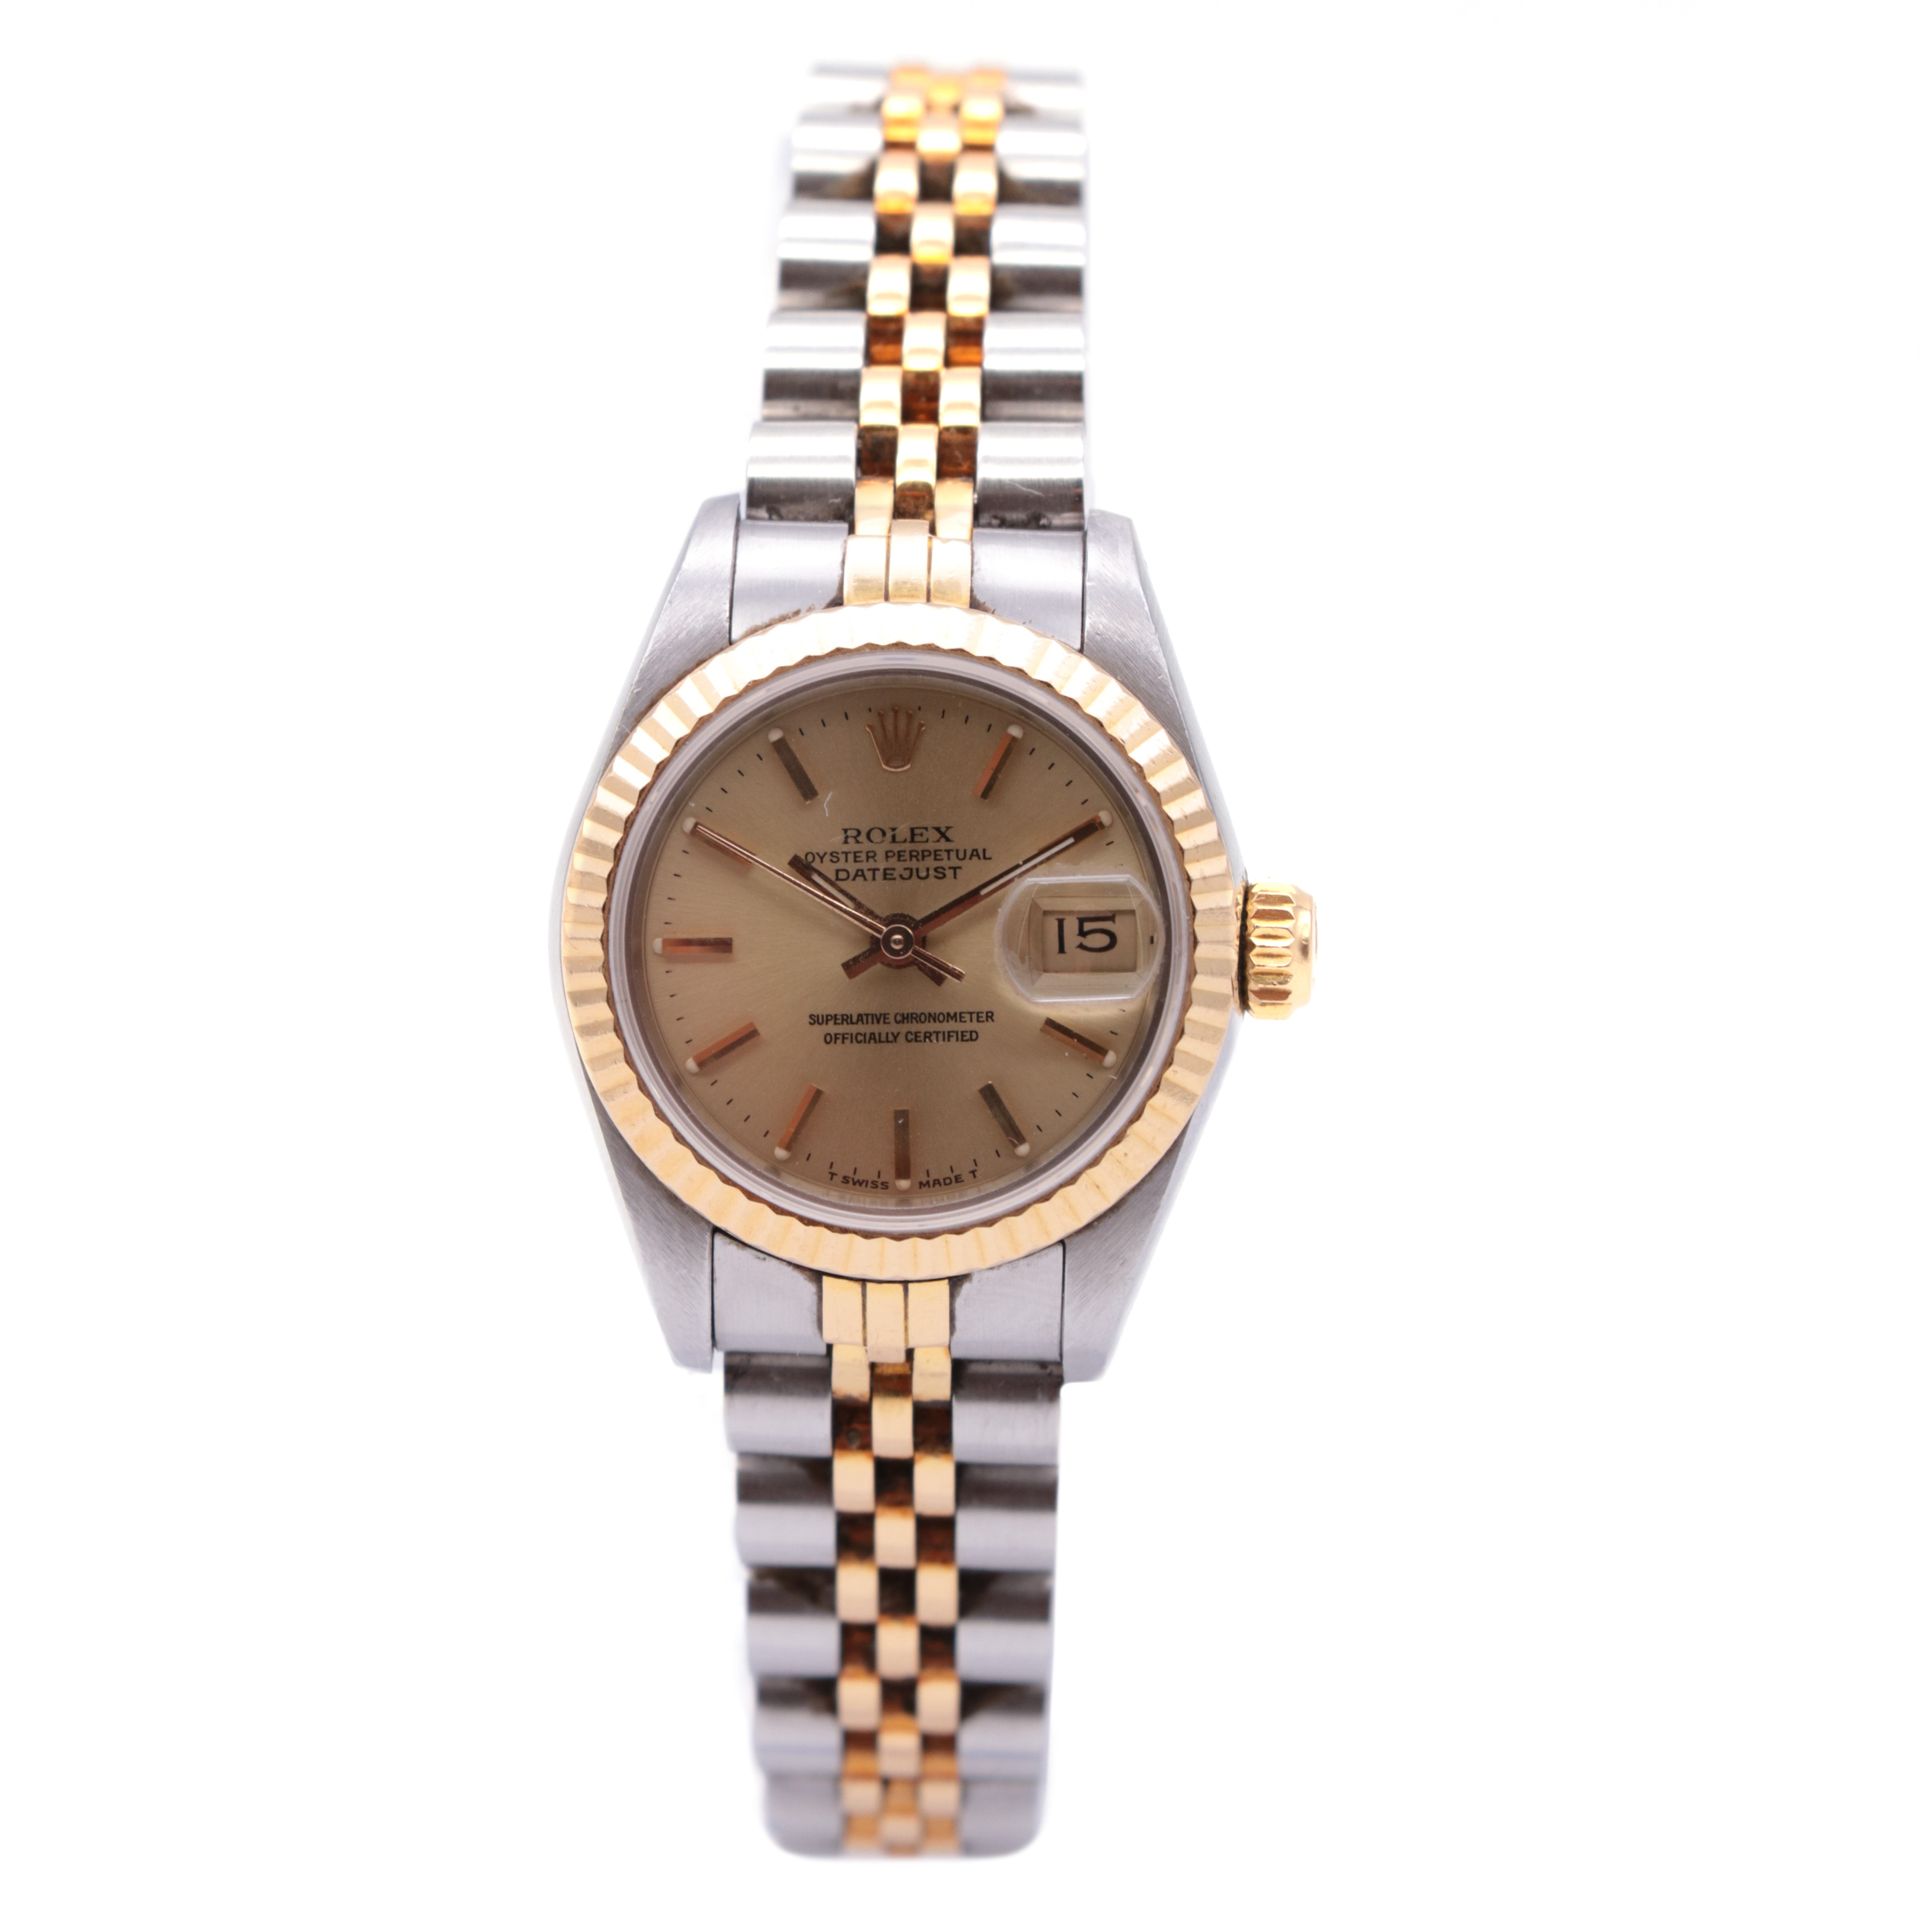 Montre Rolex, Oyster Perpetual Datejust The steel case, signed

The circular gol&hellip;